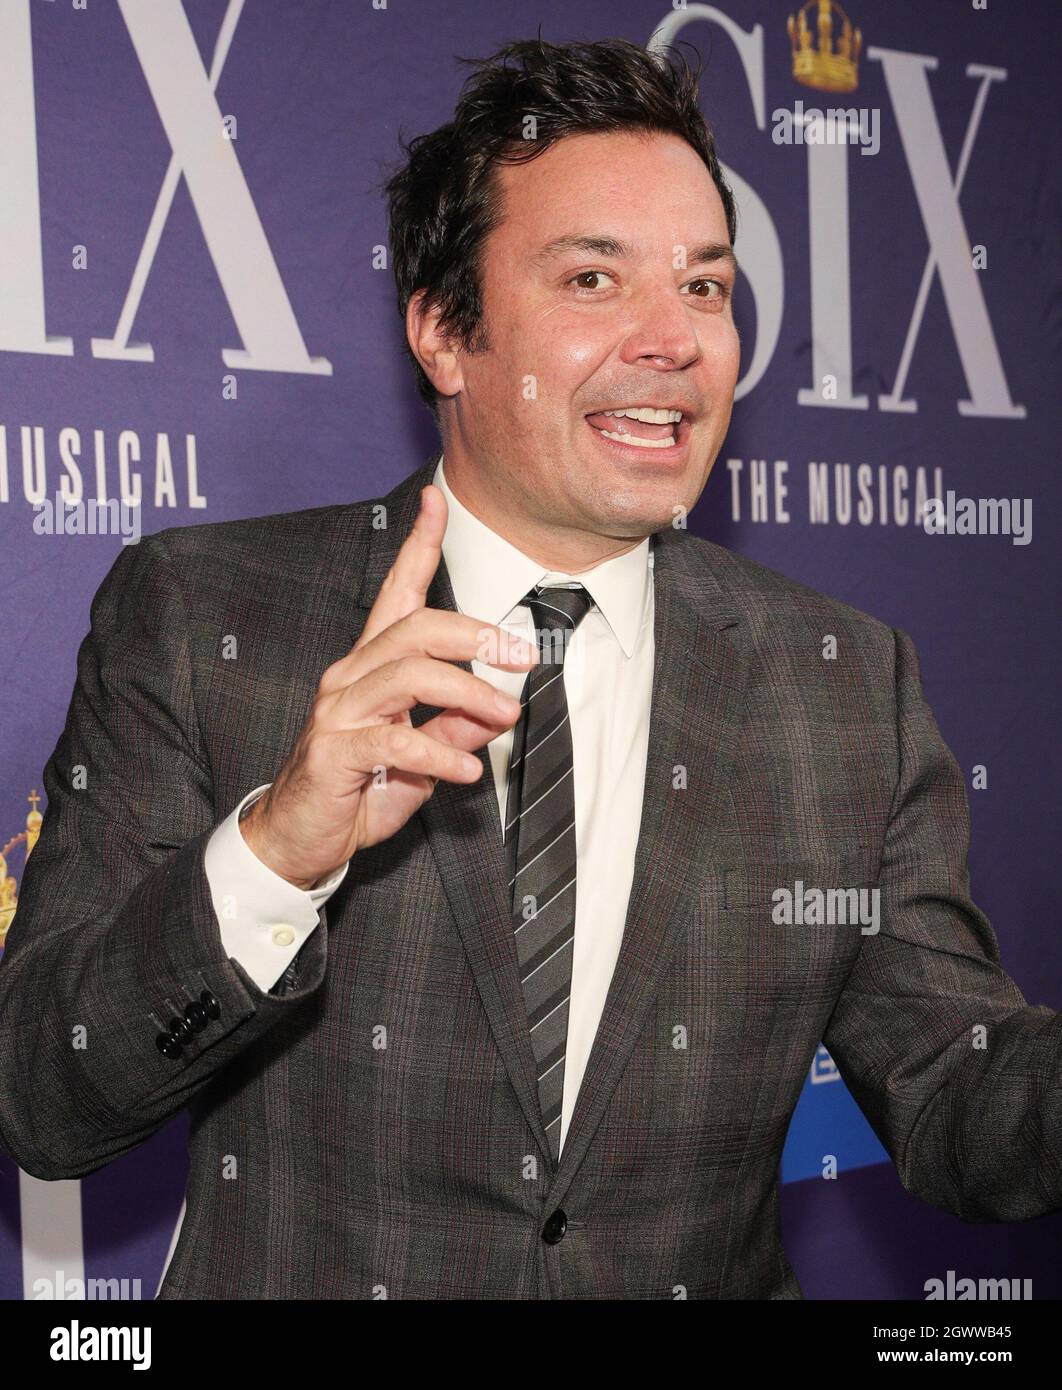 New York, NY, USA. 3rd Oct, 2021. Jimmy Fallon at arrivals for SIX: THE MUSICAL Opening Night, Brooks Atkinson Theatre, New York, NY October 3, 2021. Credit: CJ Rivera/Everett Collection/Alamy Live News Stock Photo